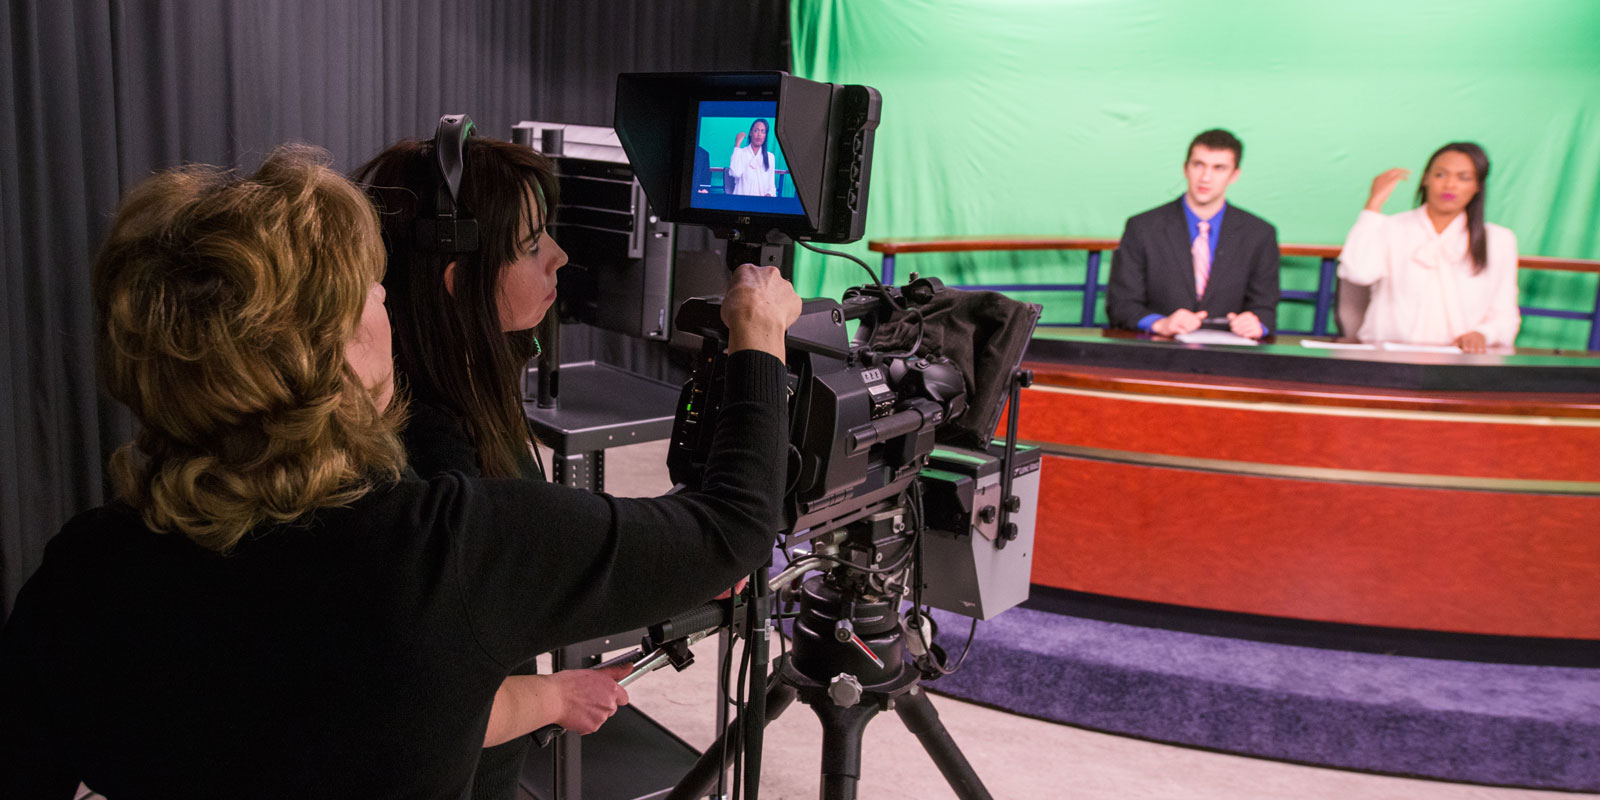 Star City News production students prepare for a live broadcast